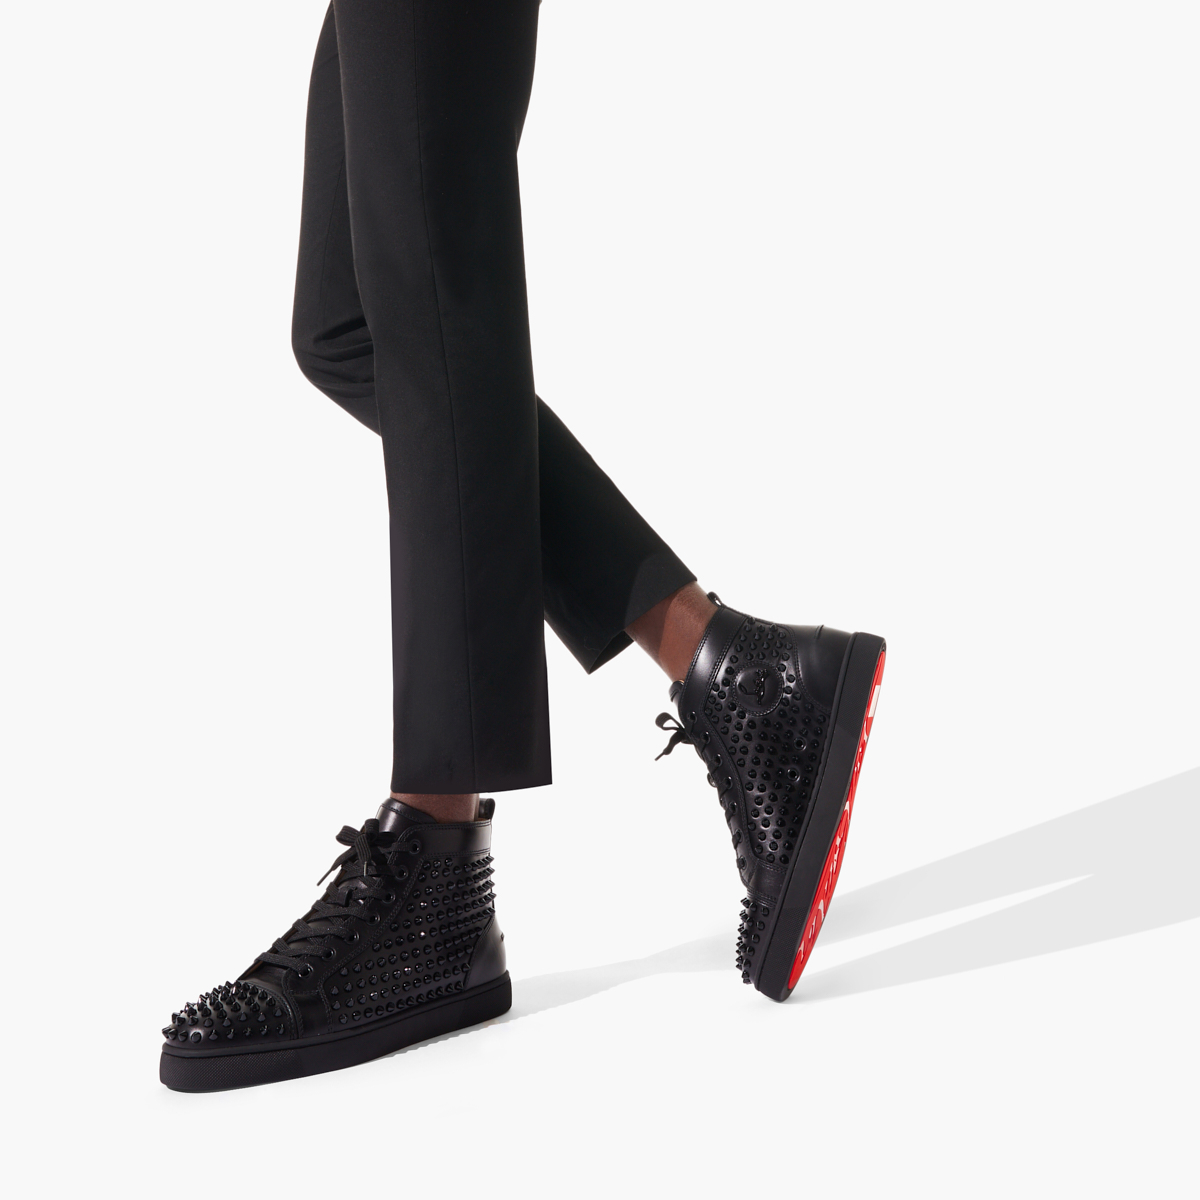 Spikes - Sneakers - Calf leather and spikes - Black - Christian